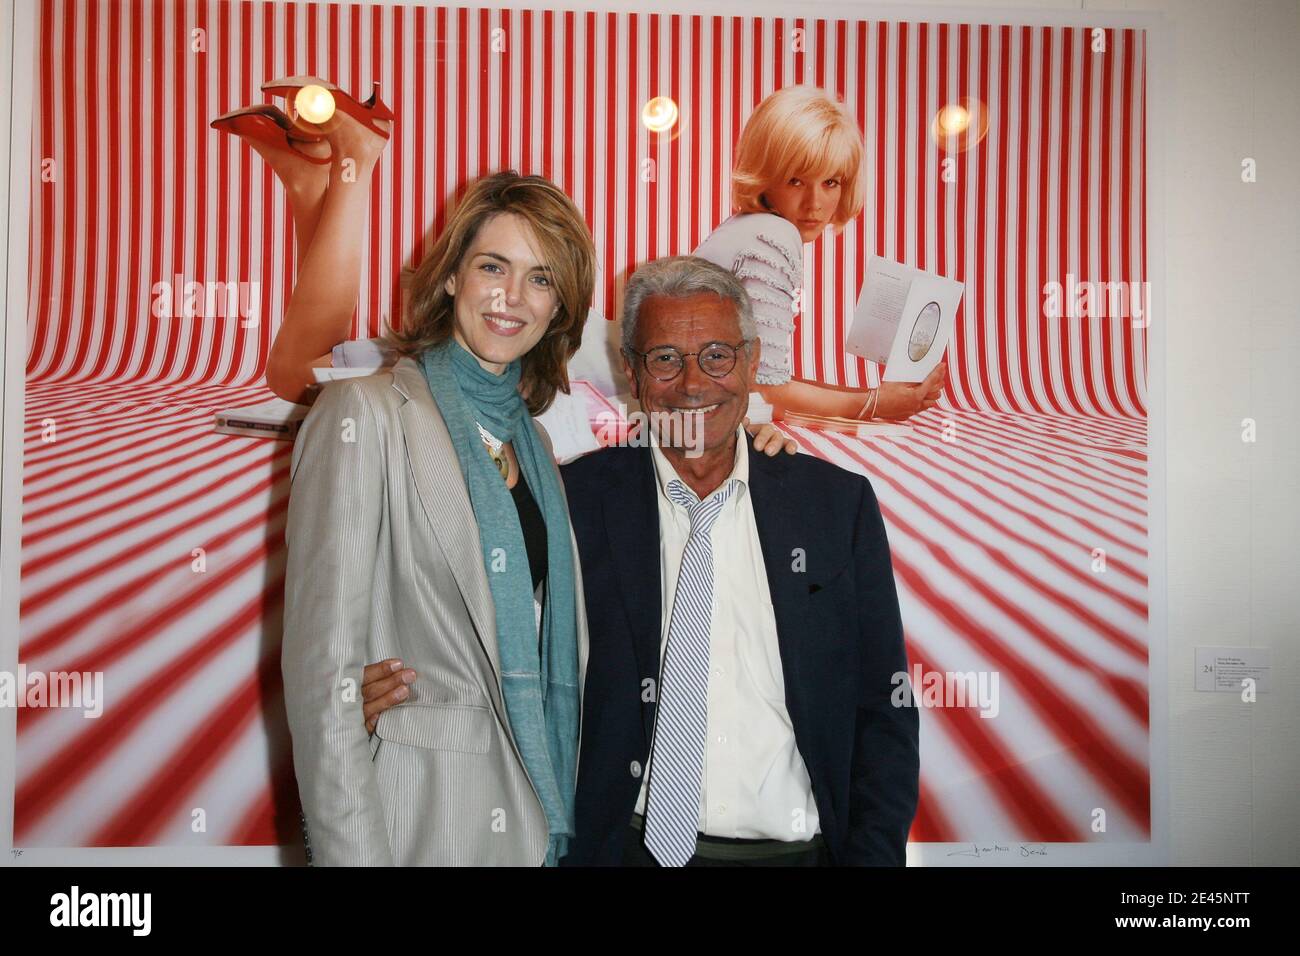 Julie Andrieu and Jean-Marie Perier attend the opening of Photographer Jean-Marie  Perier's exhibition in Paris, France on June 4, 2009. Photo by Denis  Guignebourg/ABACAPRESS.COM Stock Photo - Alamy